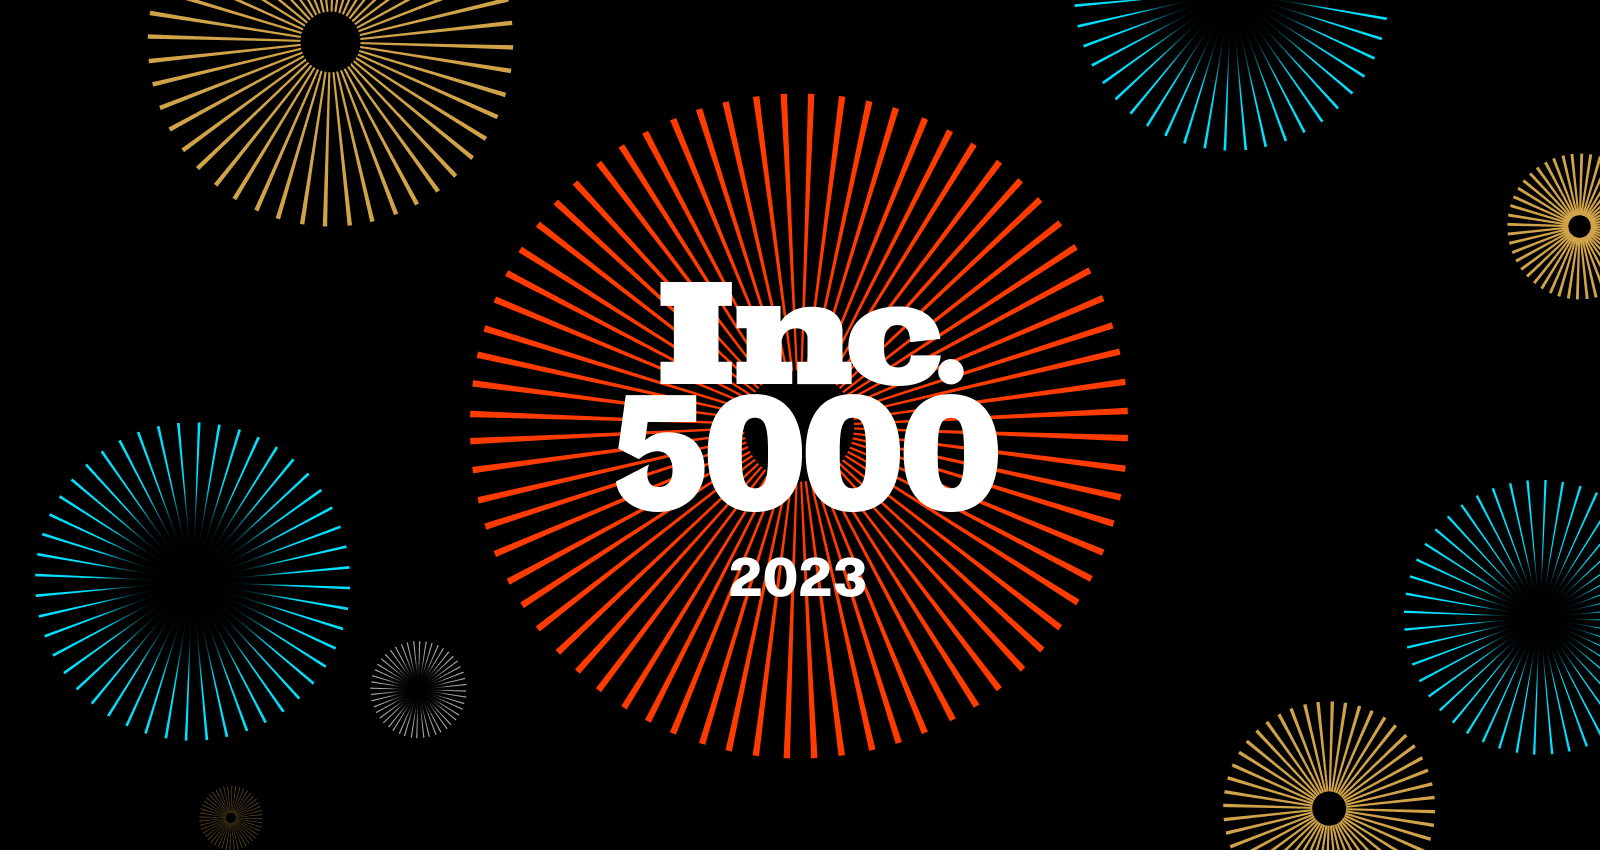 For the Fourth Time, Ole Smoky Distillery Makes the Inc. 5000, at No. 3215 in 2023, With Three-Year Revenue Growth of 160 Percent